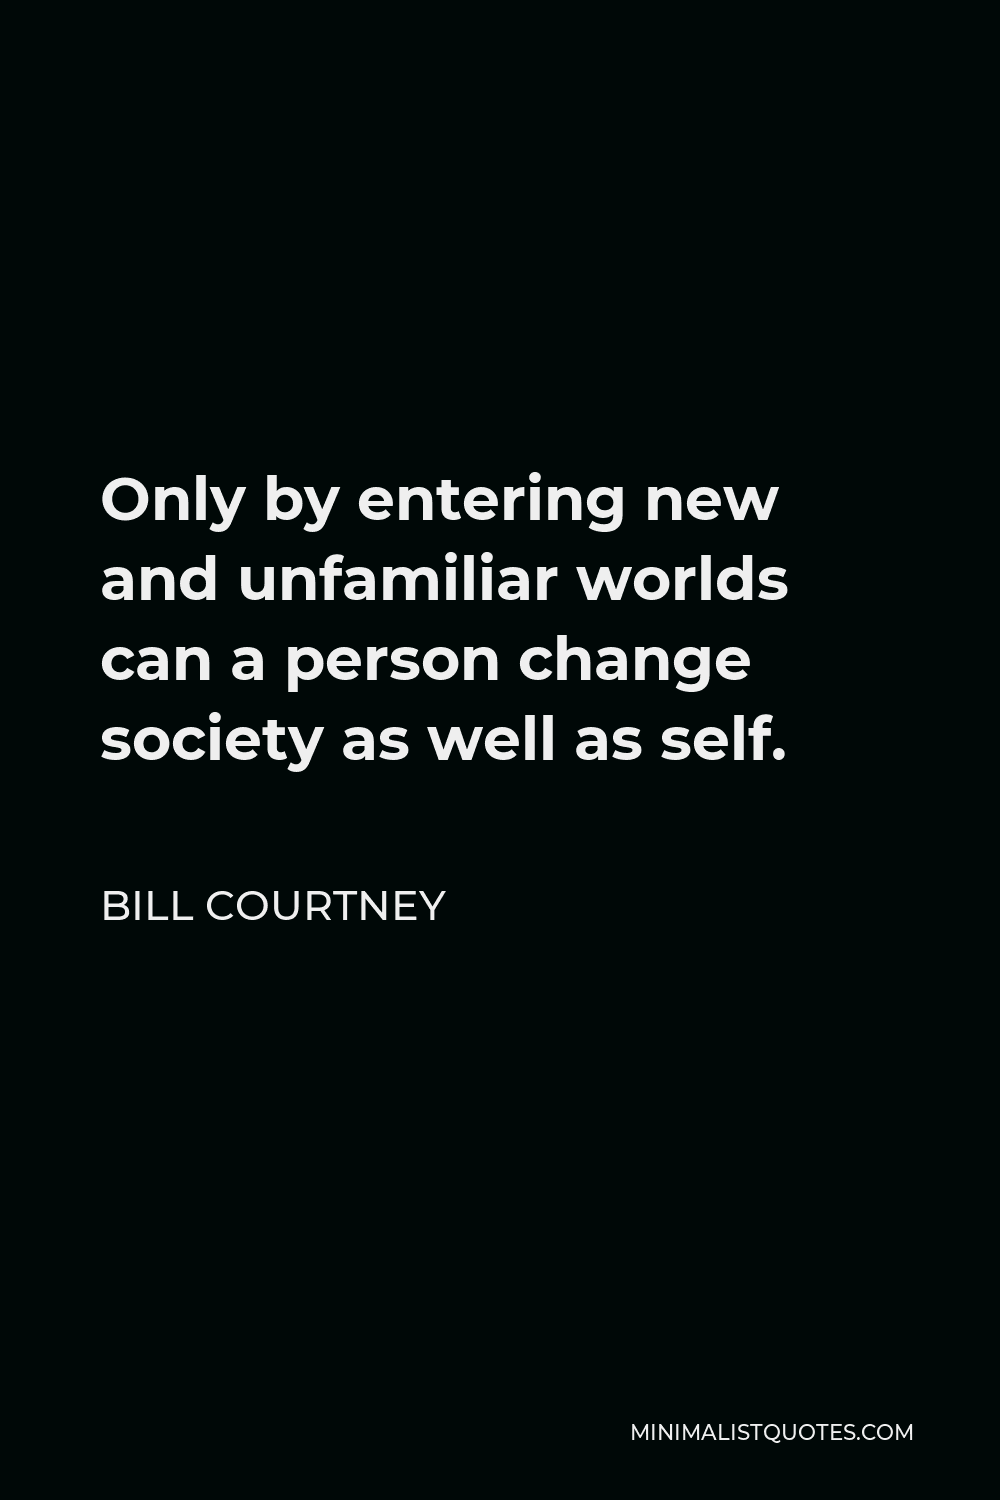 Bill Courtney Quote - Only by entering new and unfamiliar worlds can a person change society as well as self.